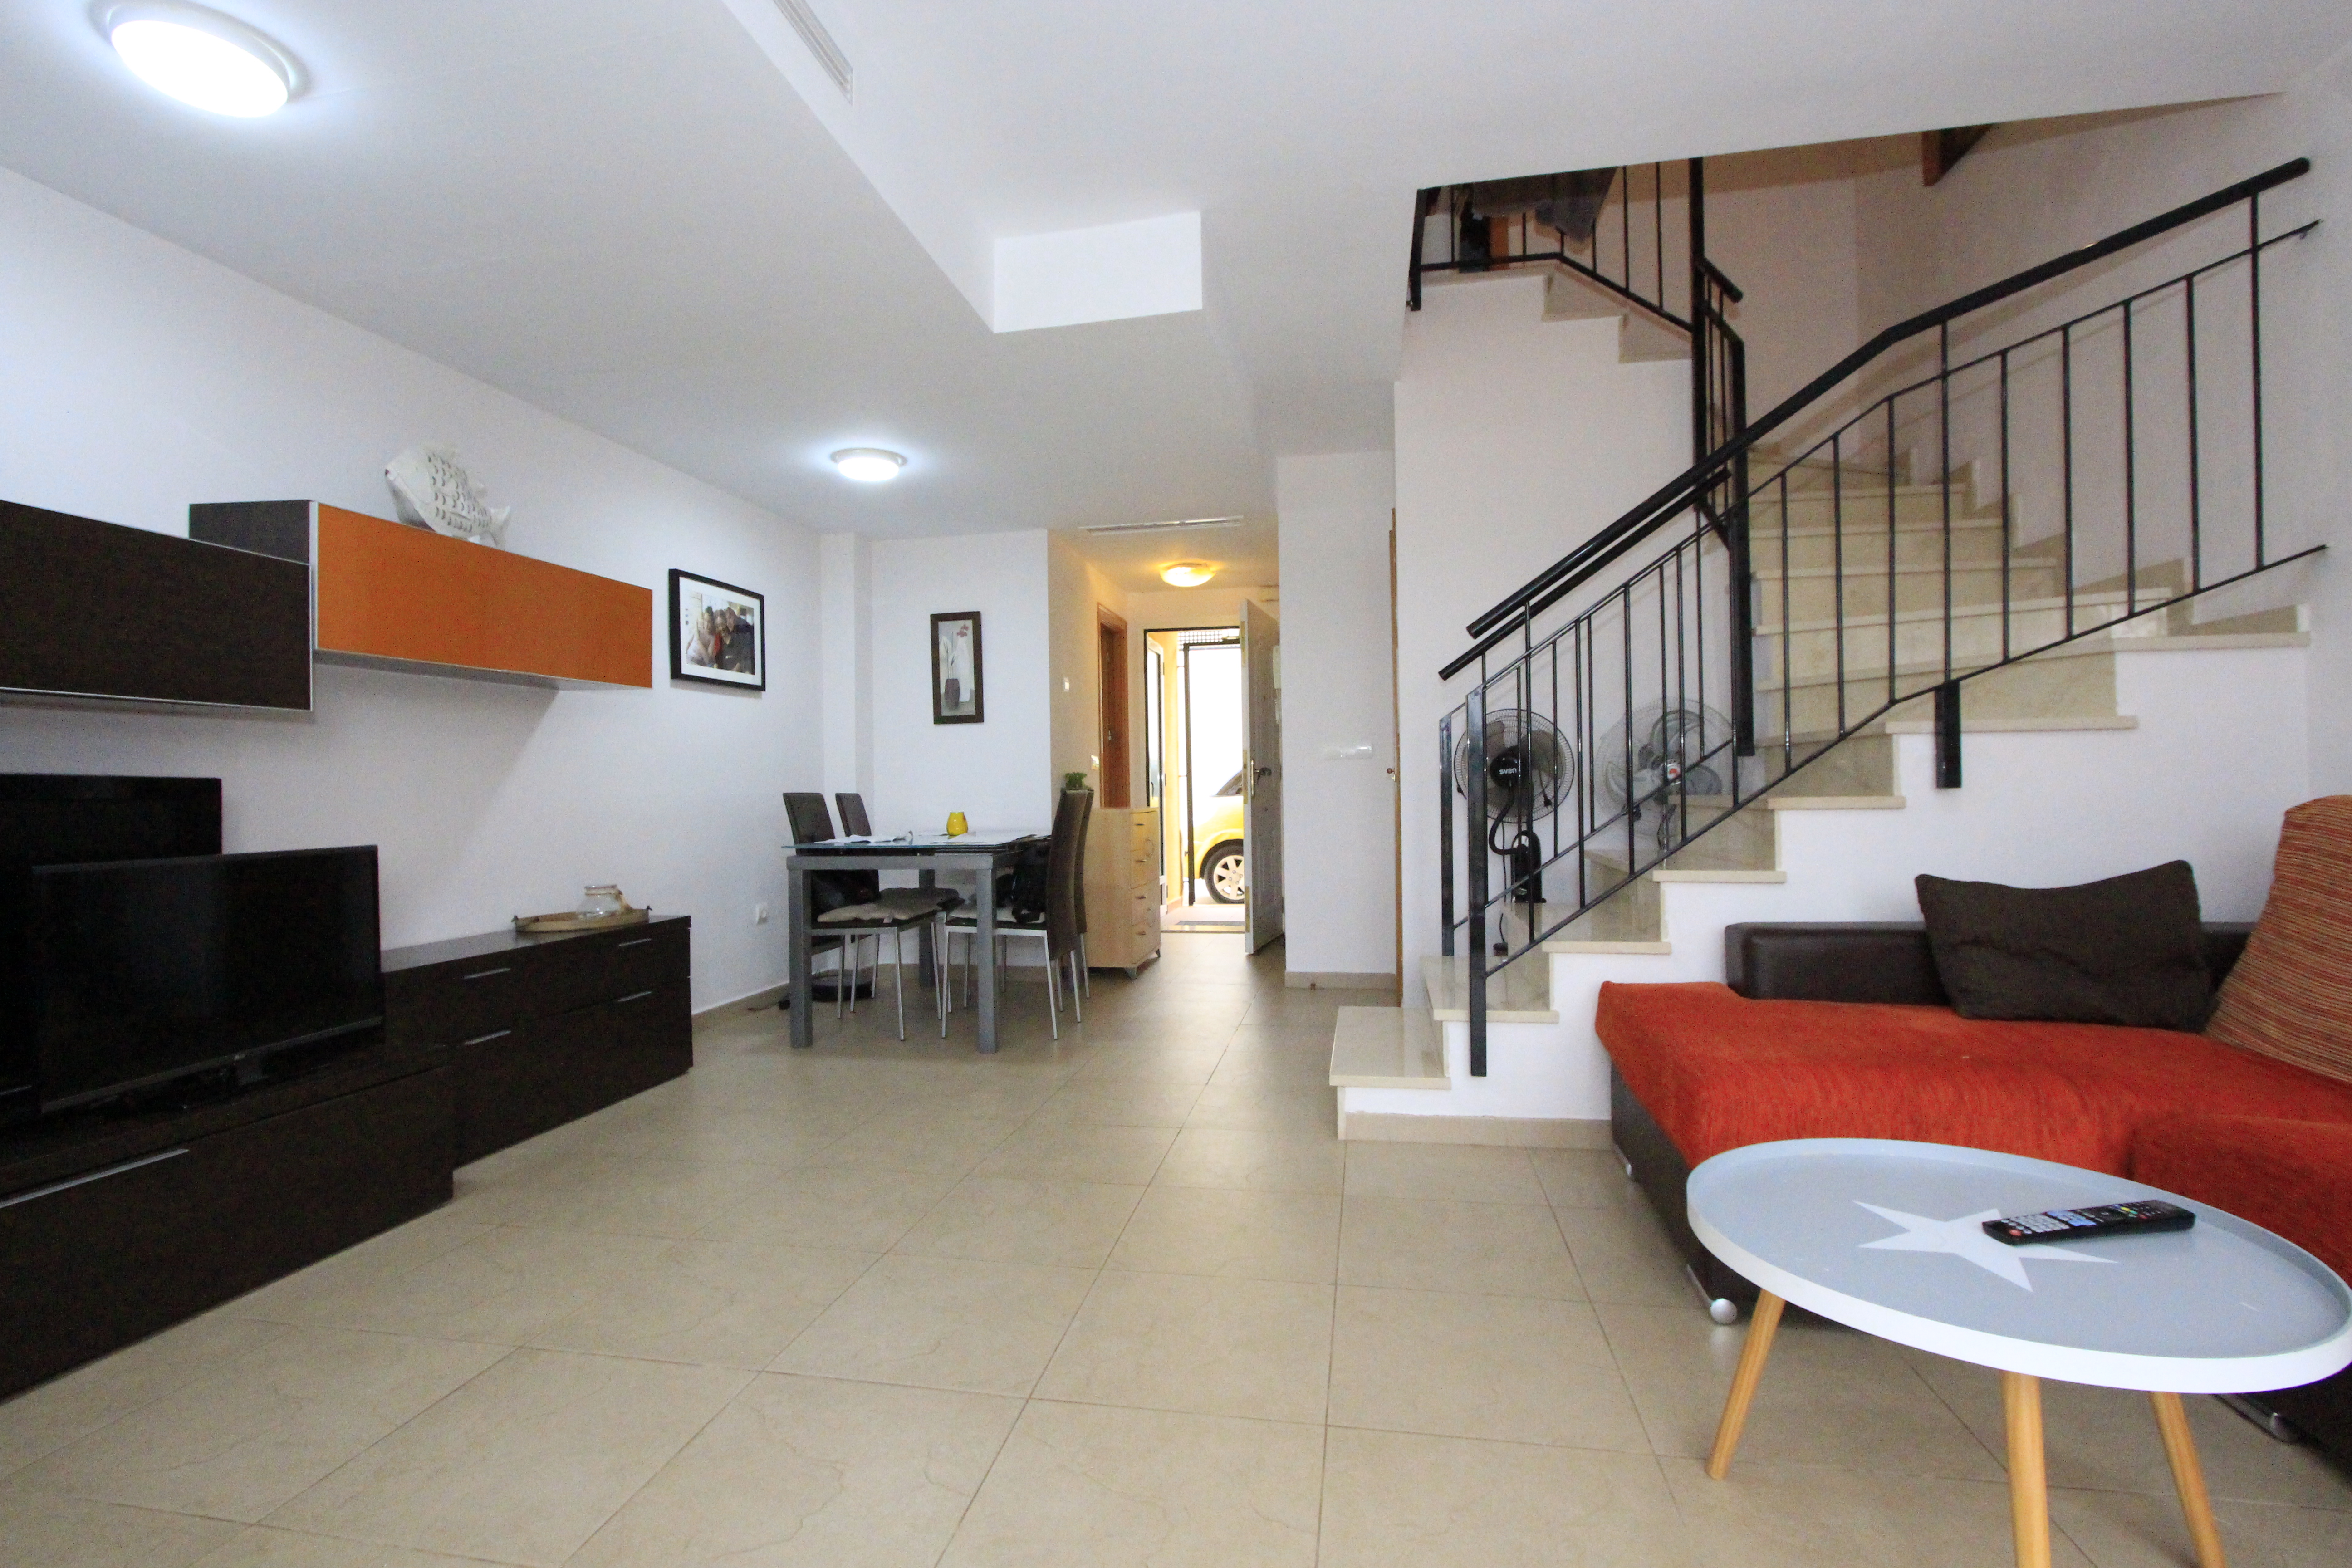 Terraced bungalow in Calpe, just 5 minutes drive from Calpe and its beaches.